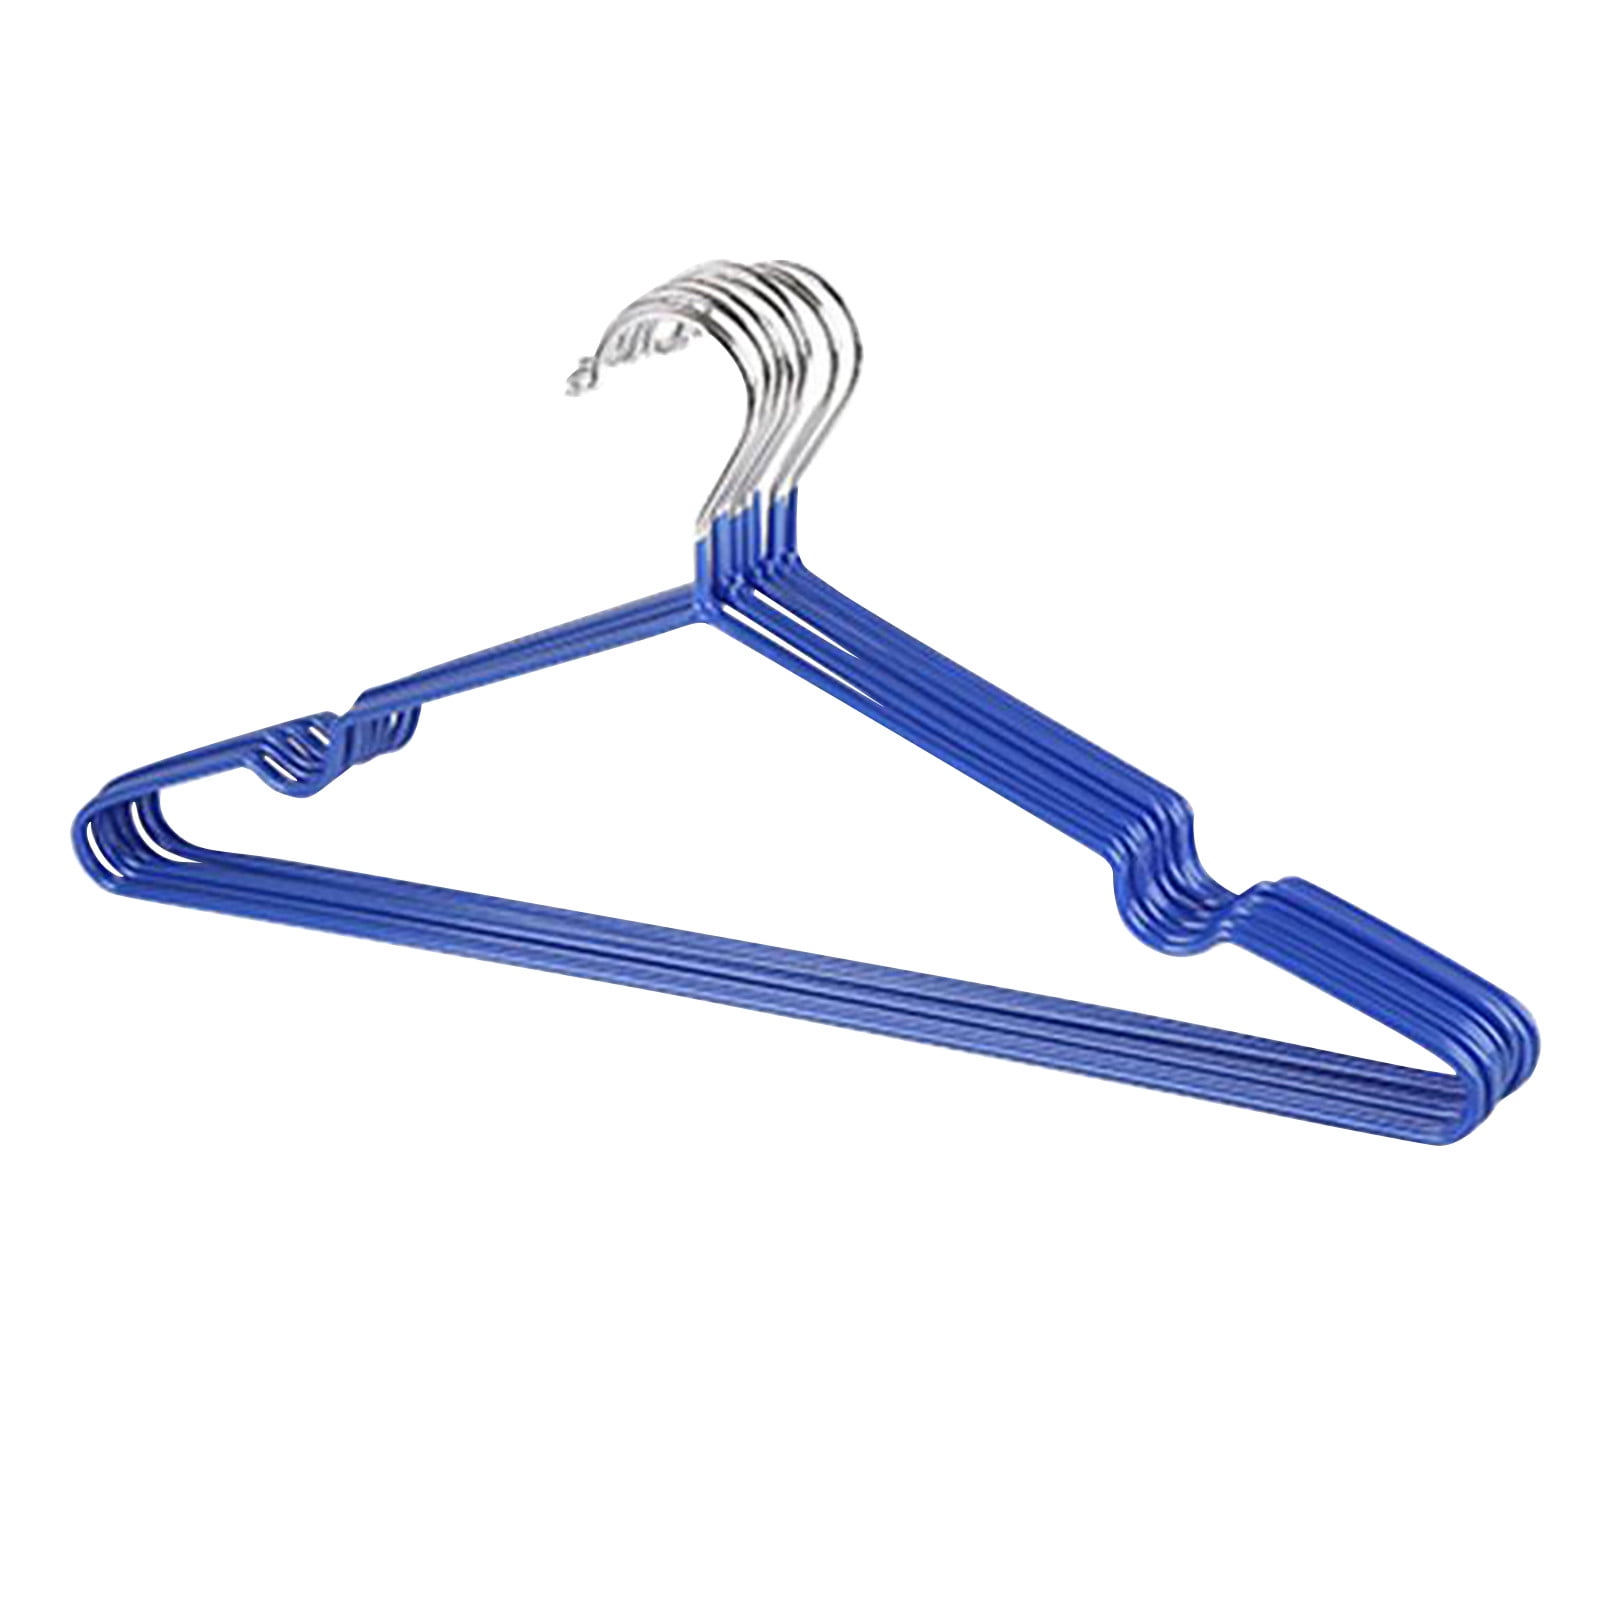 Details about   30 Pack Stainless Steel Clothes Hangers Heavy Duty Strong Metal Suit Coat Hanger 